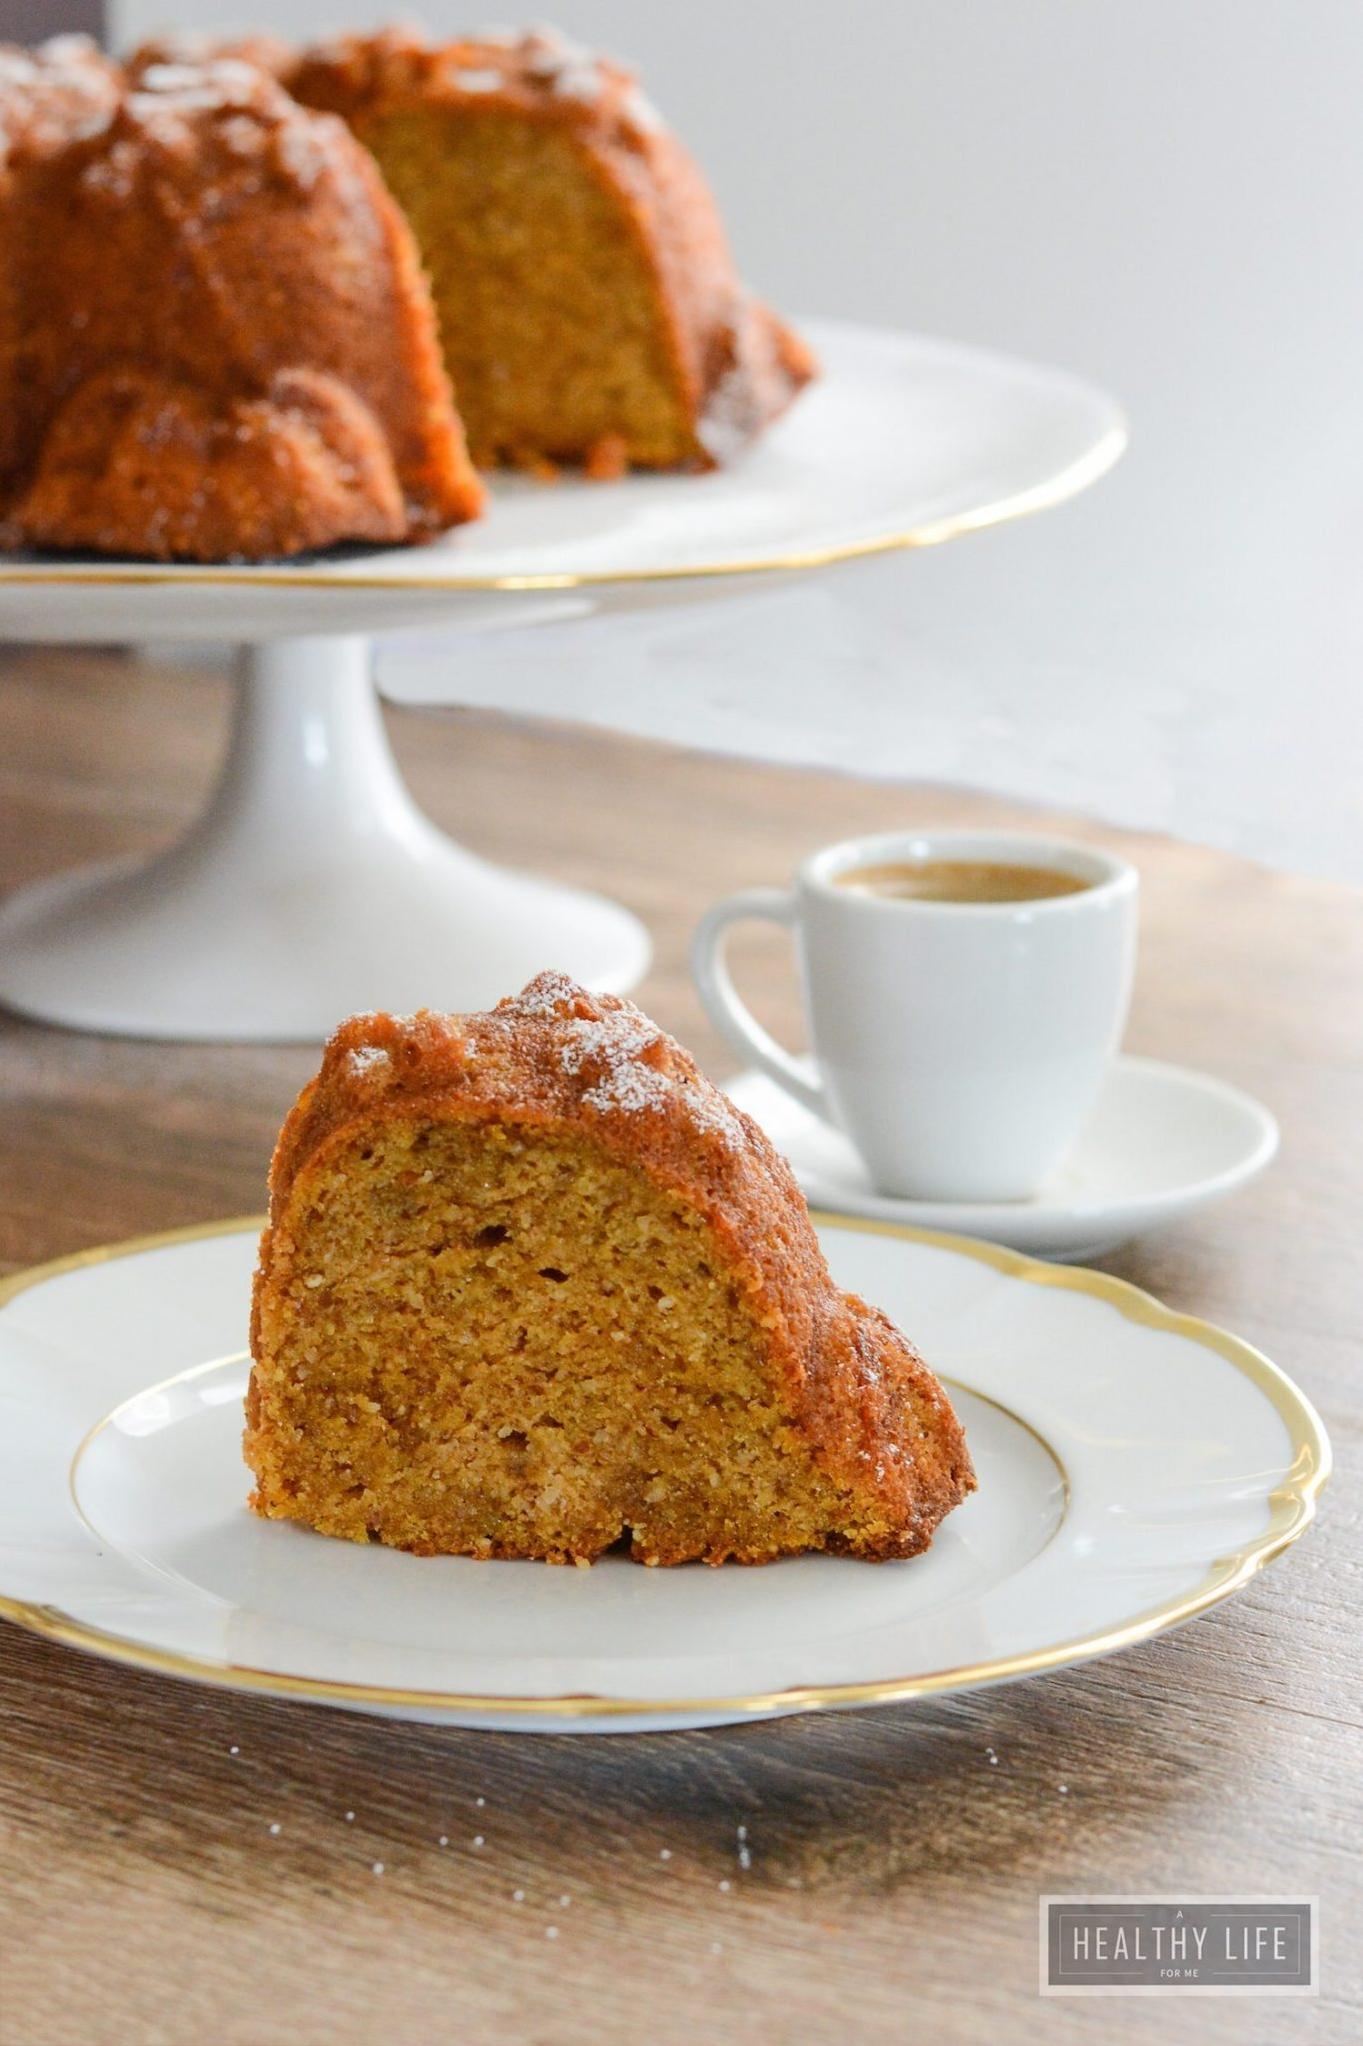  Moist and flavorful pound cake with hints of cinnamon and nutmeg